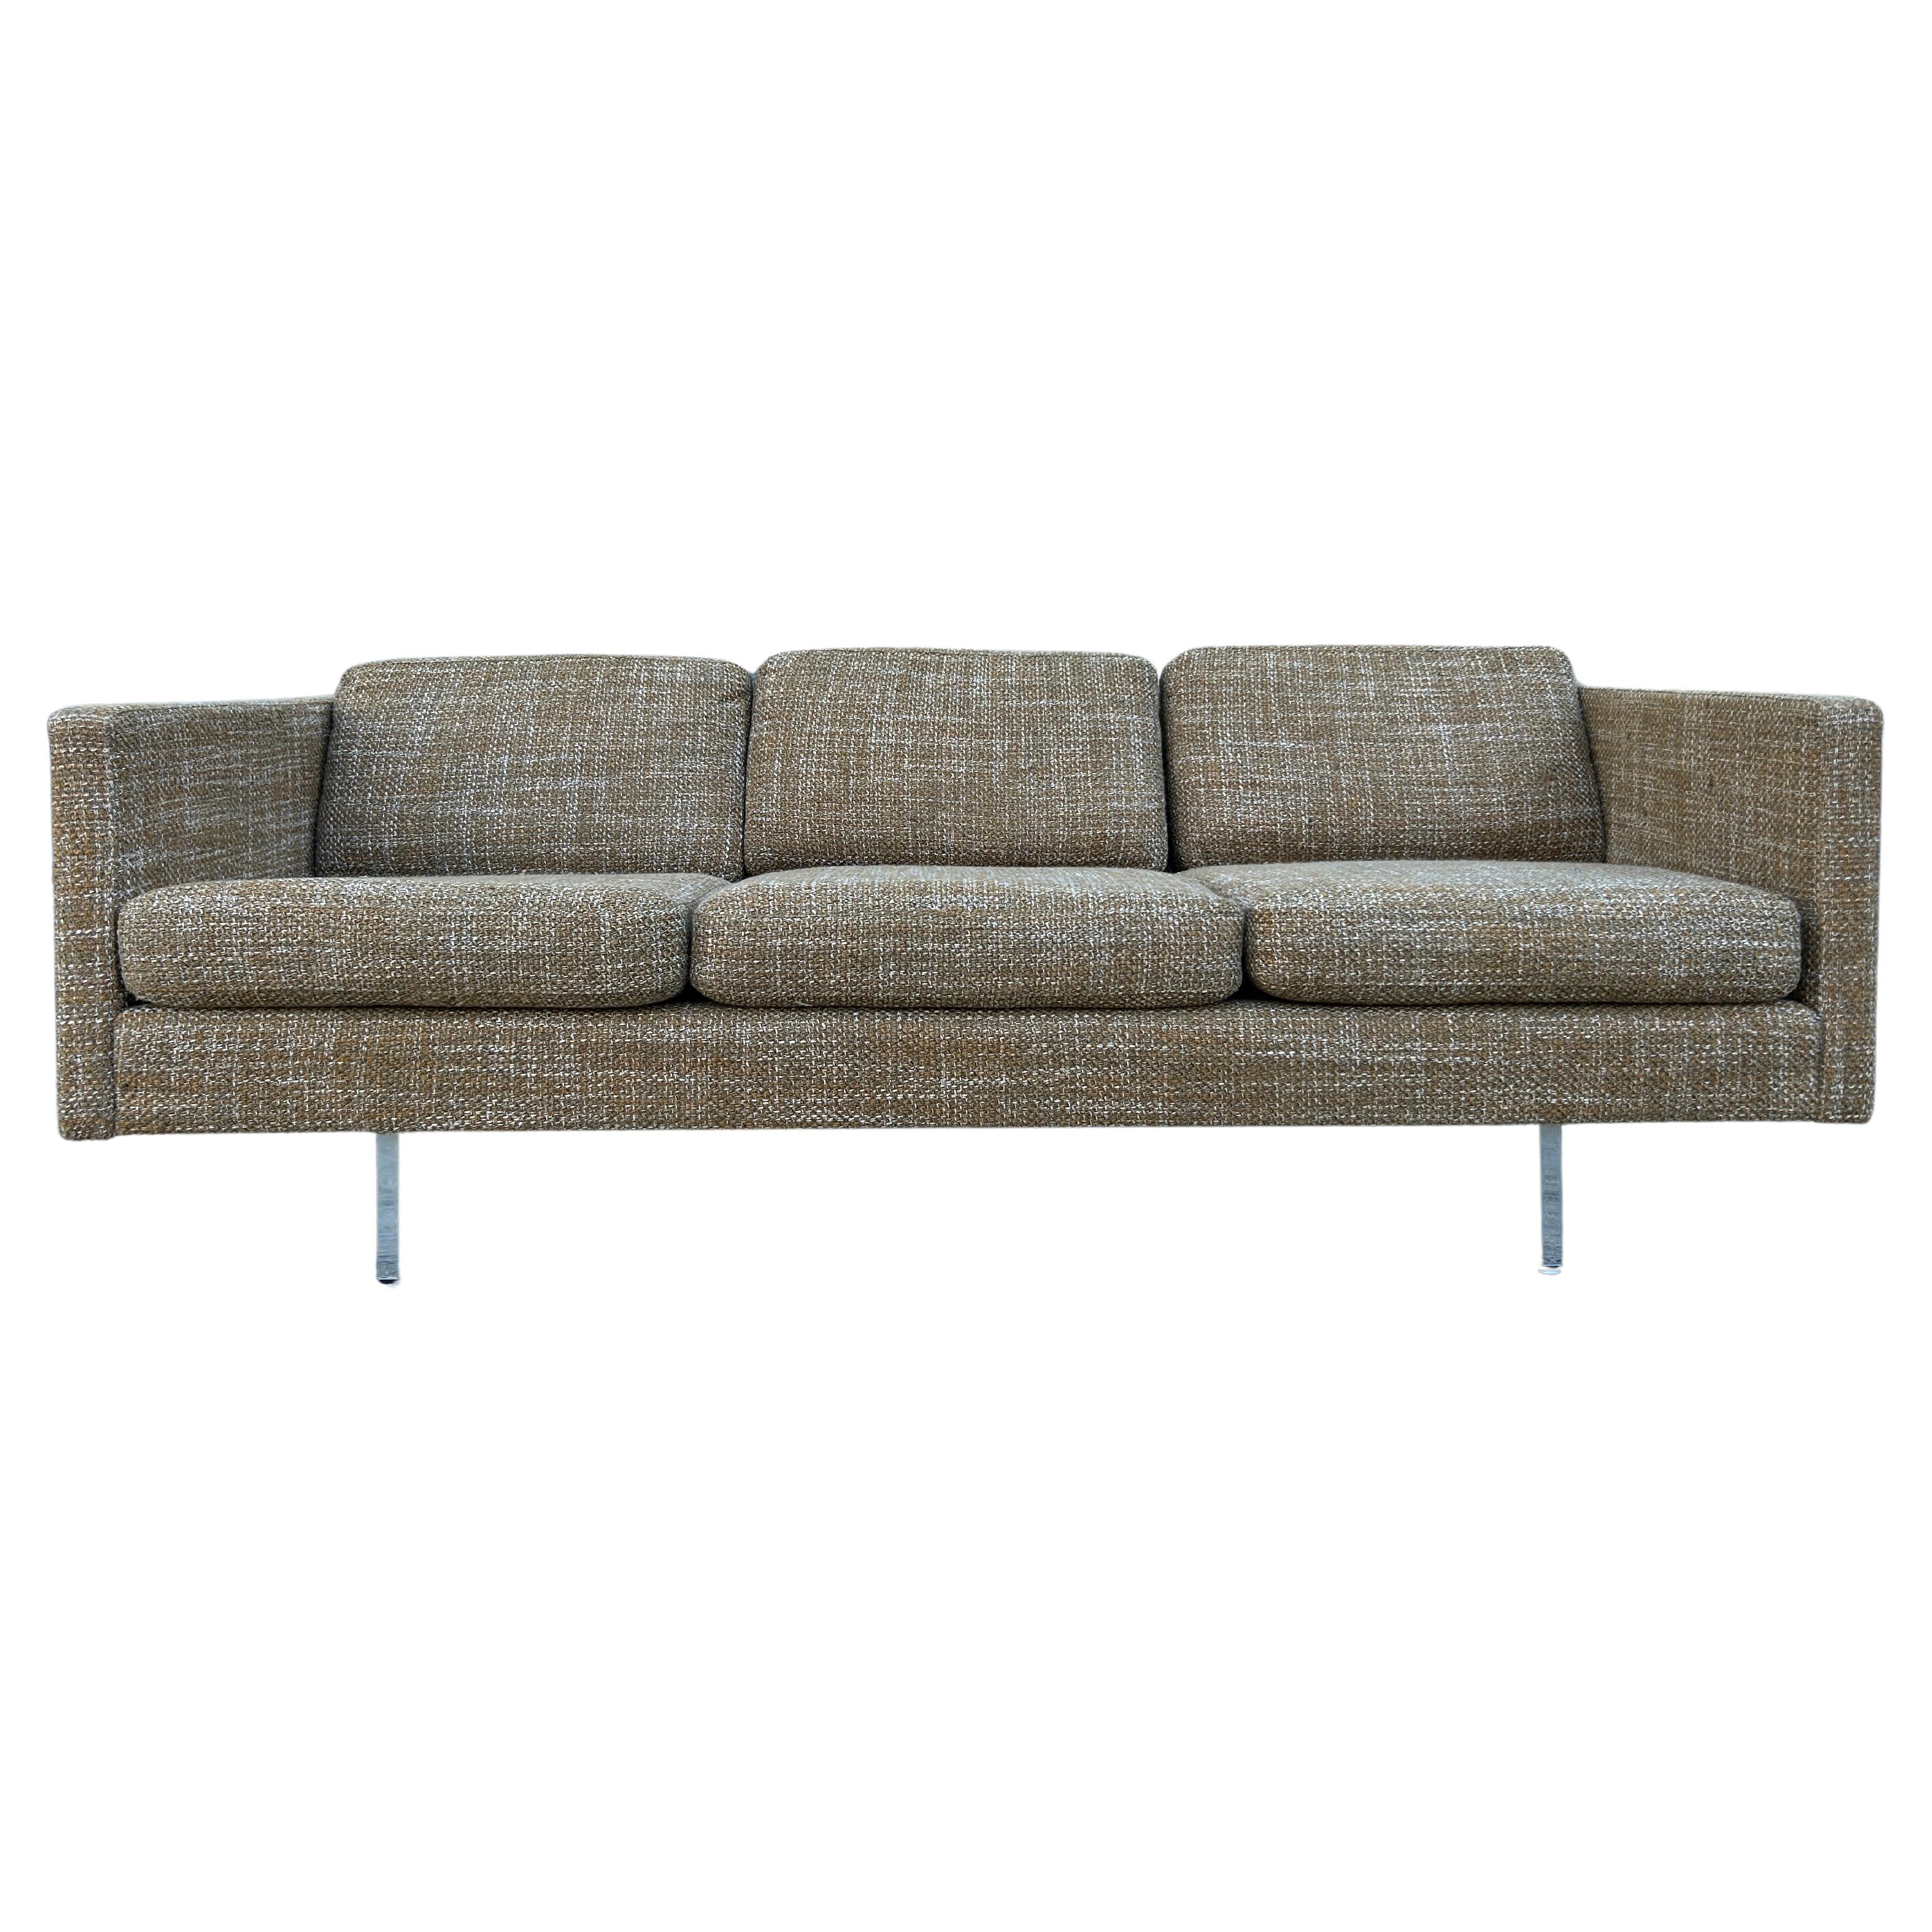 Mid-Century Danish Modern Cube 3 Seat Sofa in Brown Woven Upholstery